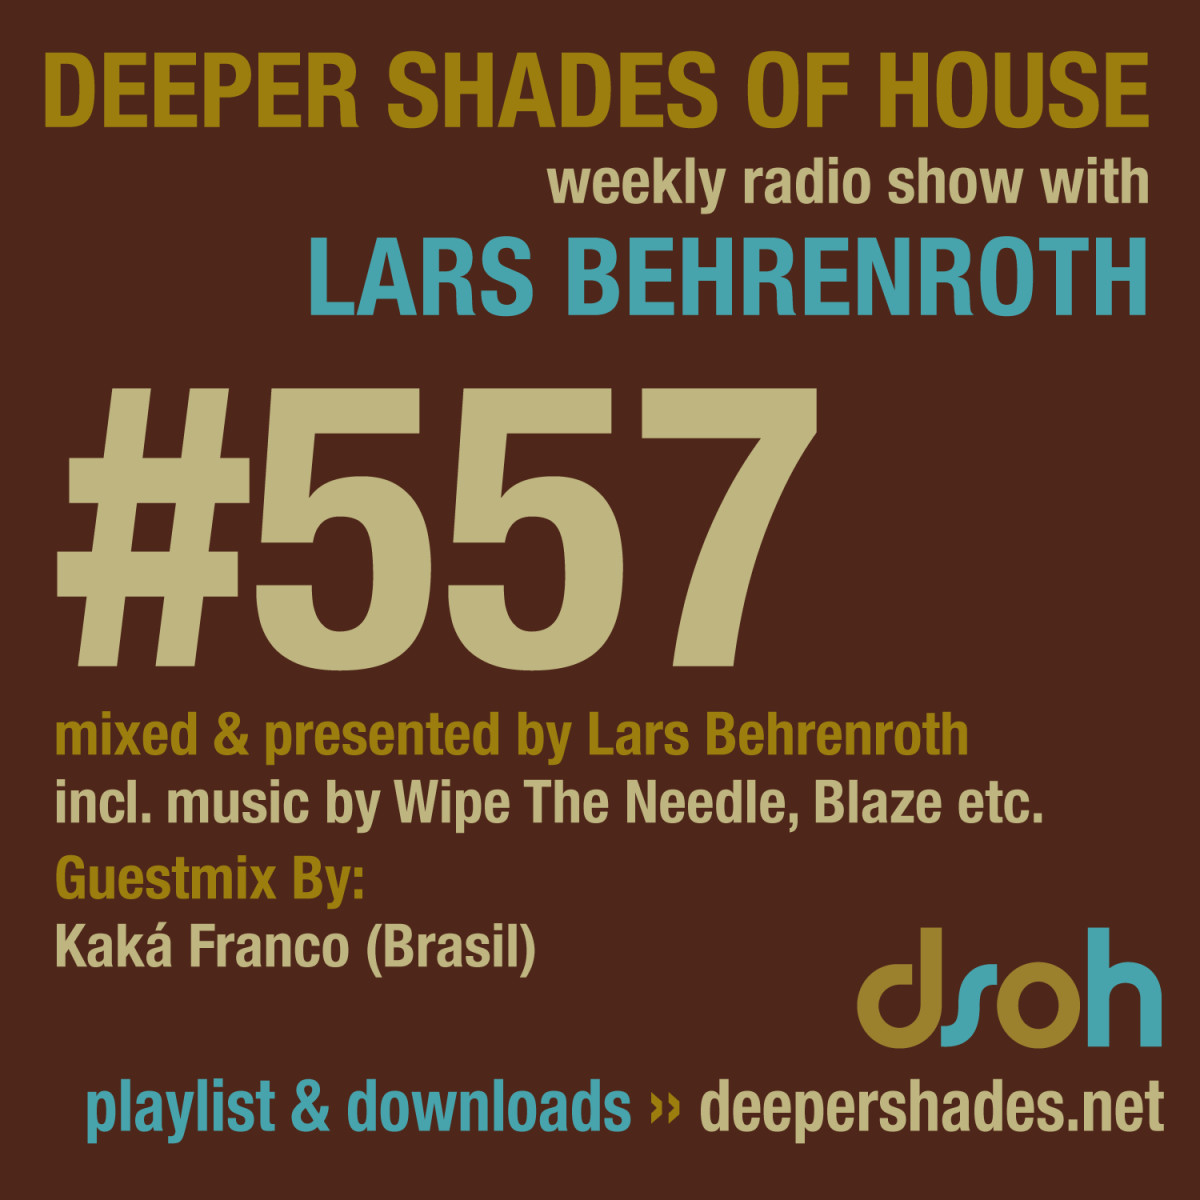 #nowplaying on radio.deepershades.net : Lars Behrenroth w/ exclusive guest mix by Kaká Franco (Brasil) - DSOH #557 Deeper Shades Of House #deephouse #livestream #dsoh #housemusic